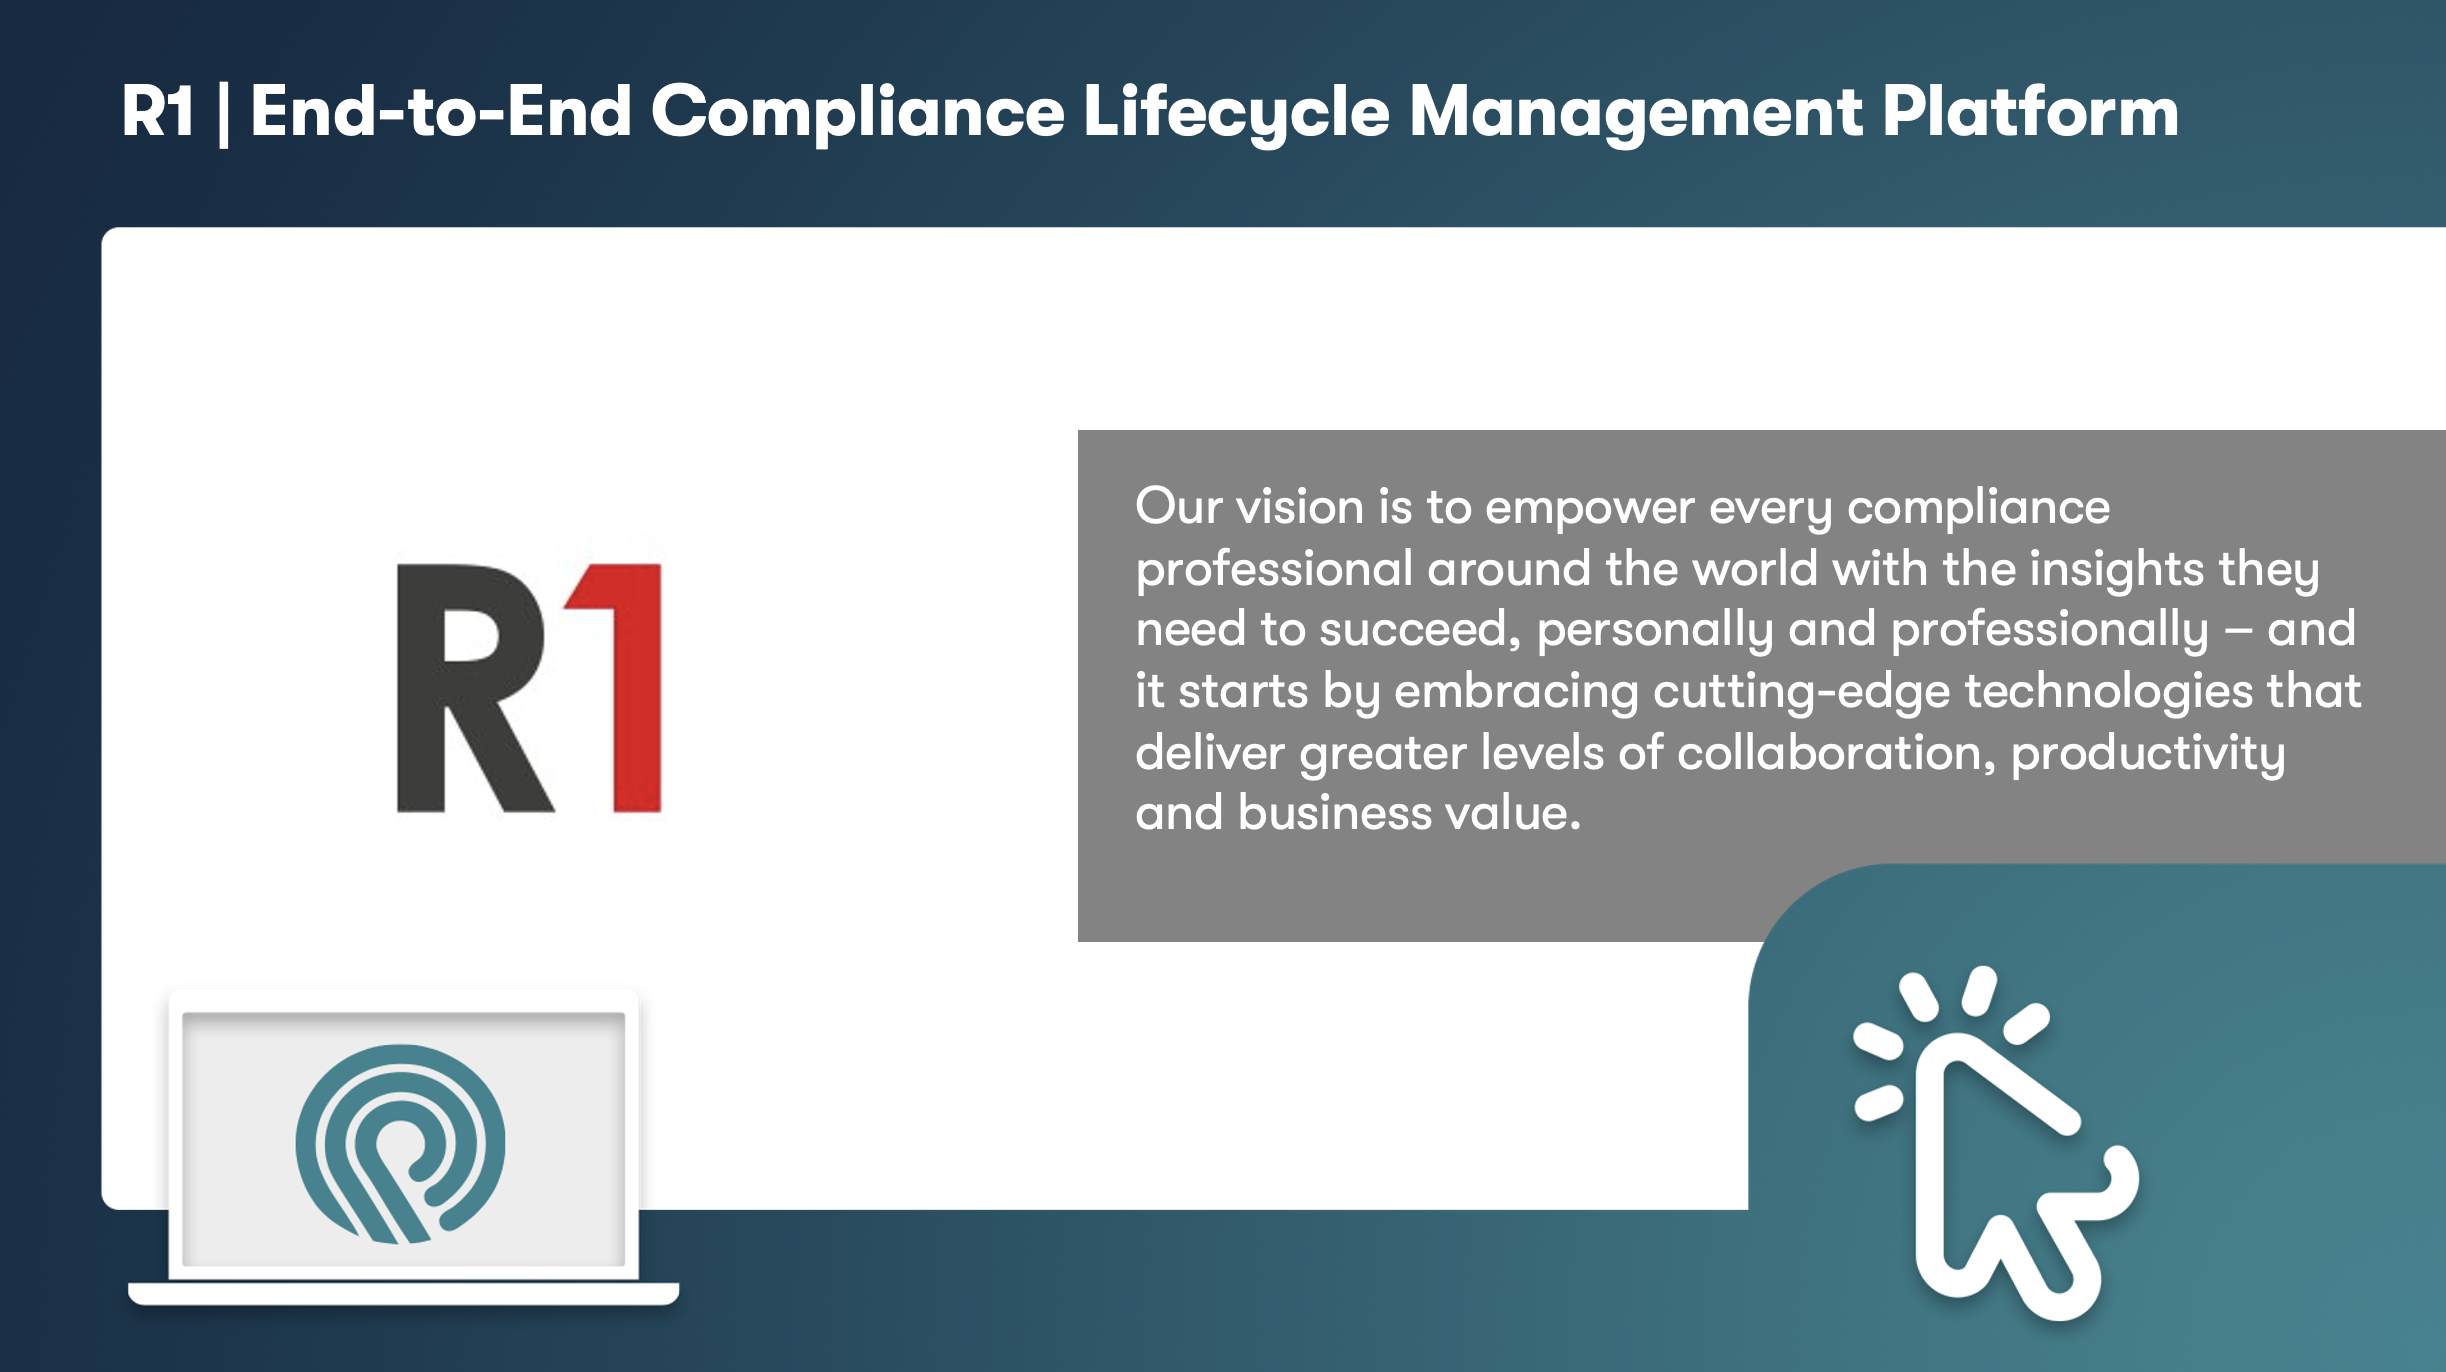 RequirementONE | End-to-End Compliance Lifecycle Management Platform